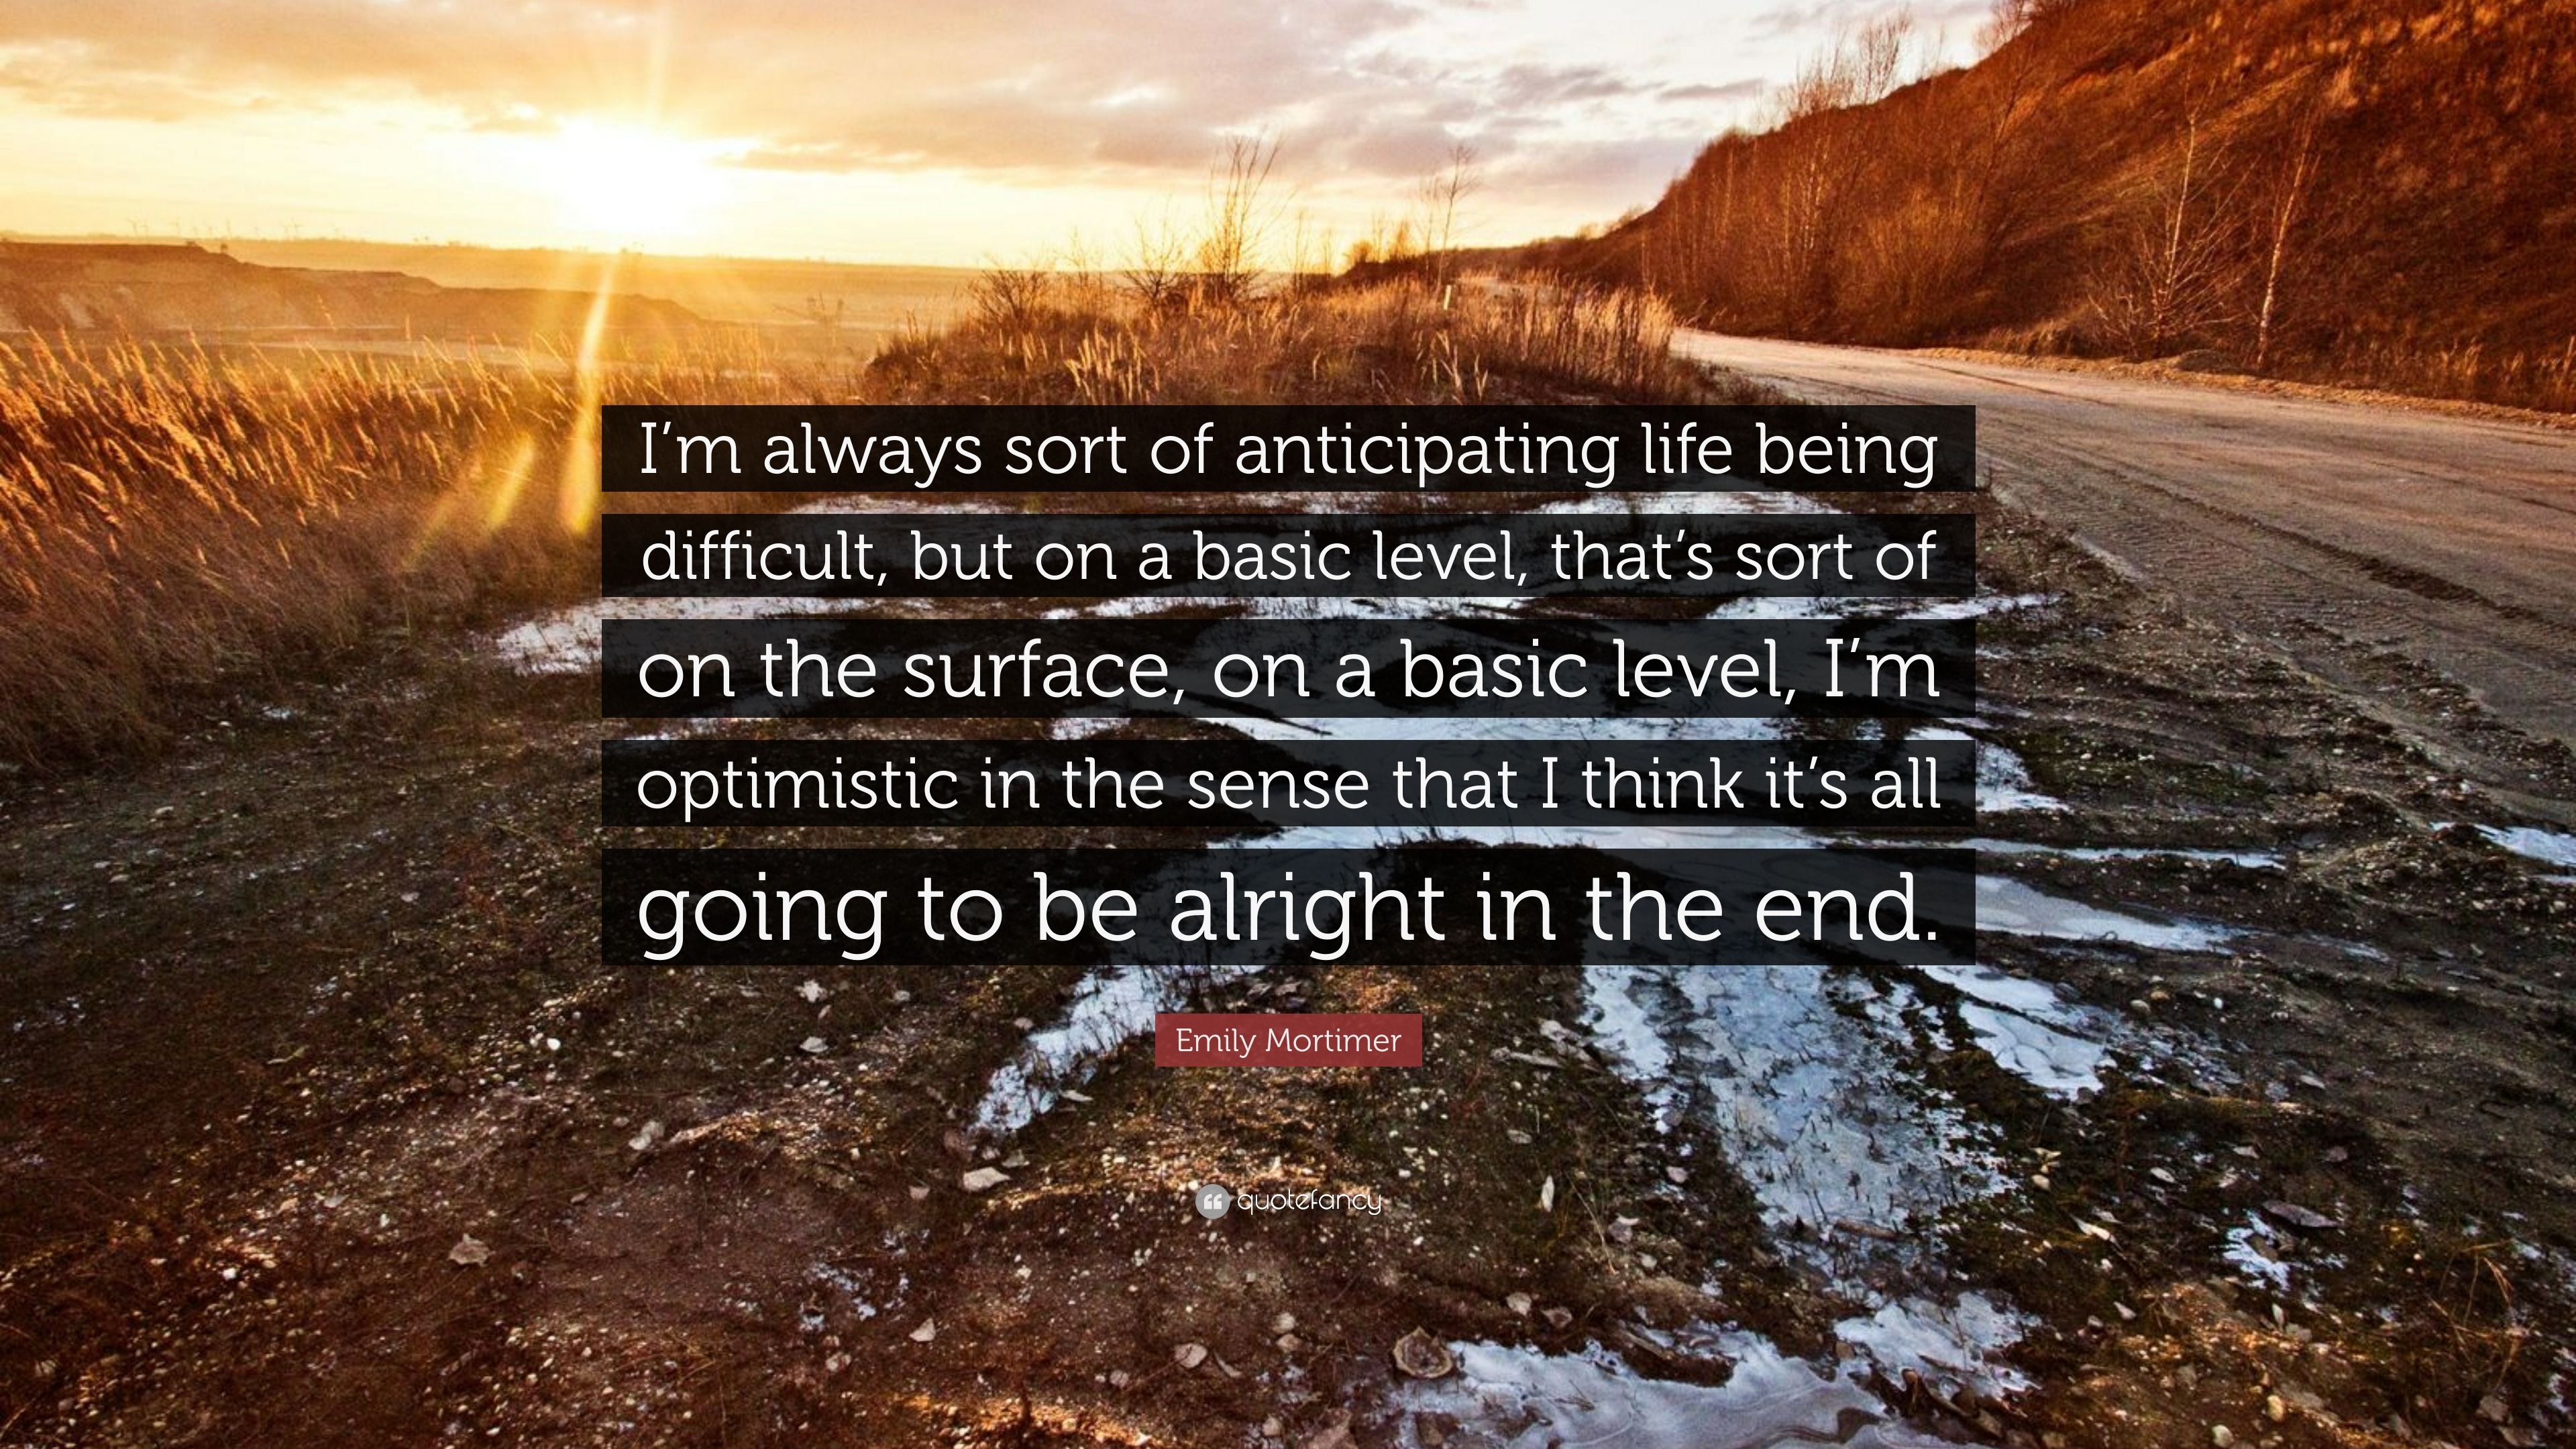 Emily Mortimer Quote: “I'm always sort of anticipating life being  difficult, but on a basic level, that's sort of on the surface, on a basic  le...”